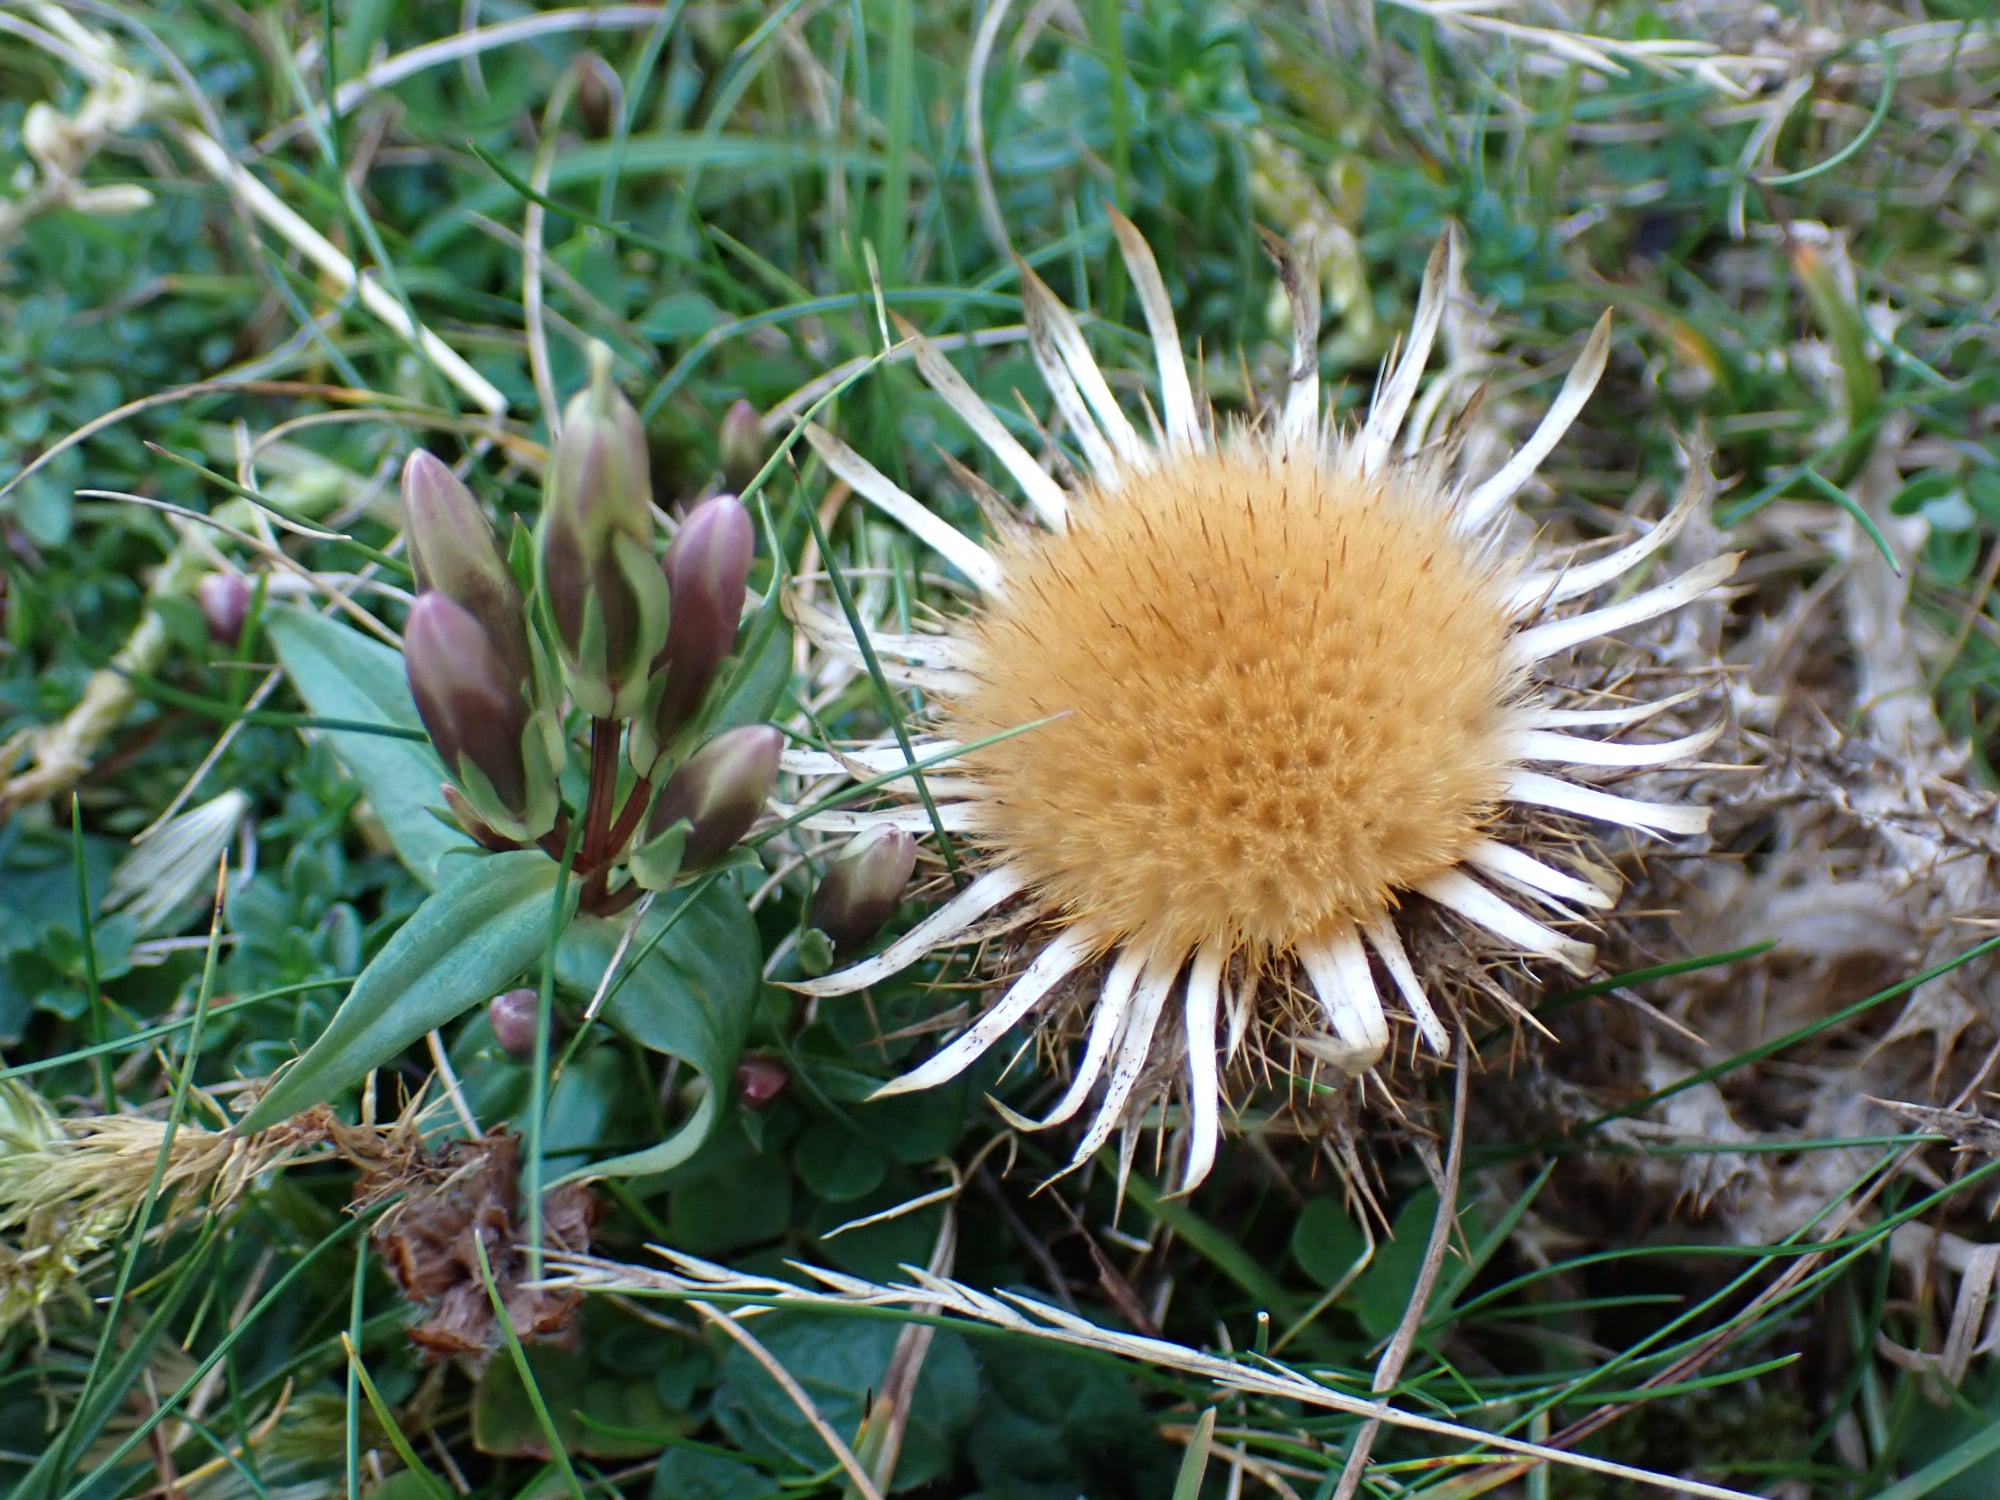 Autumn gentian and Carline thistle